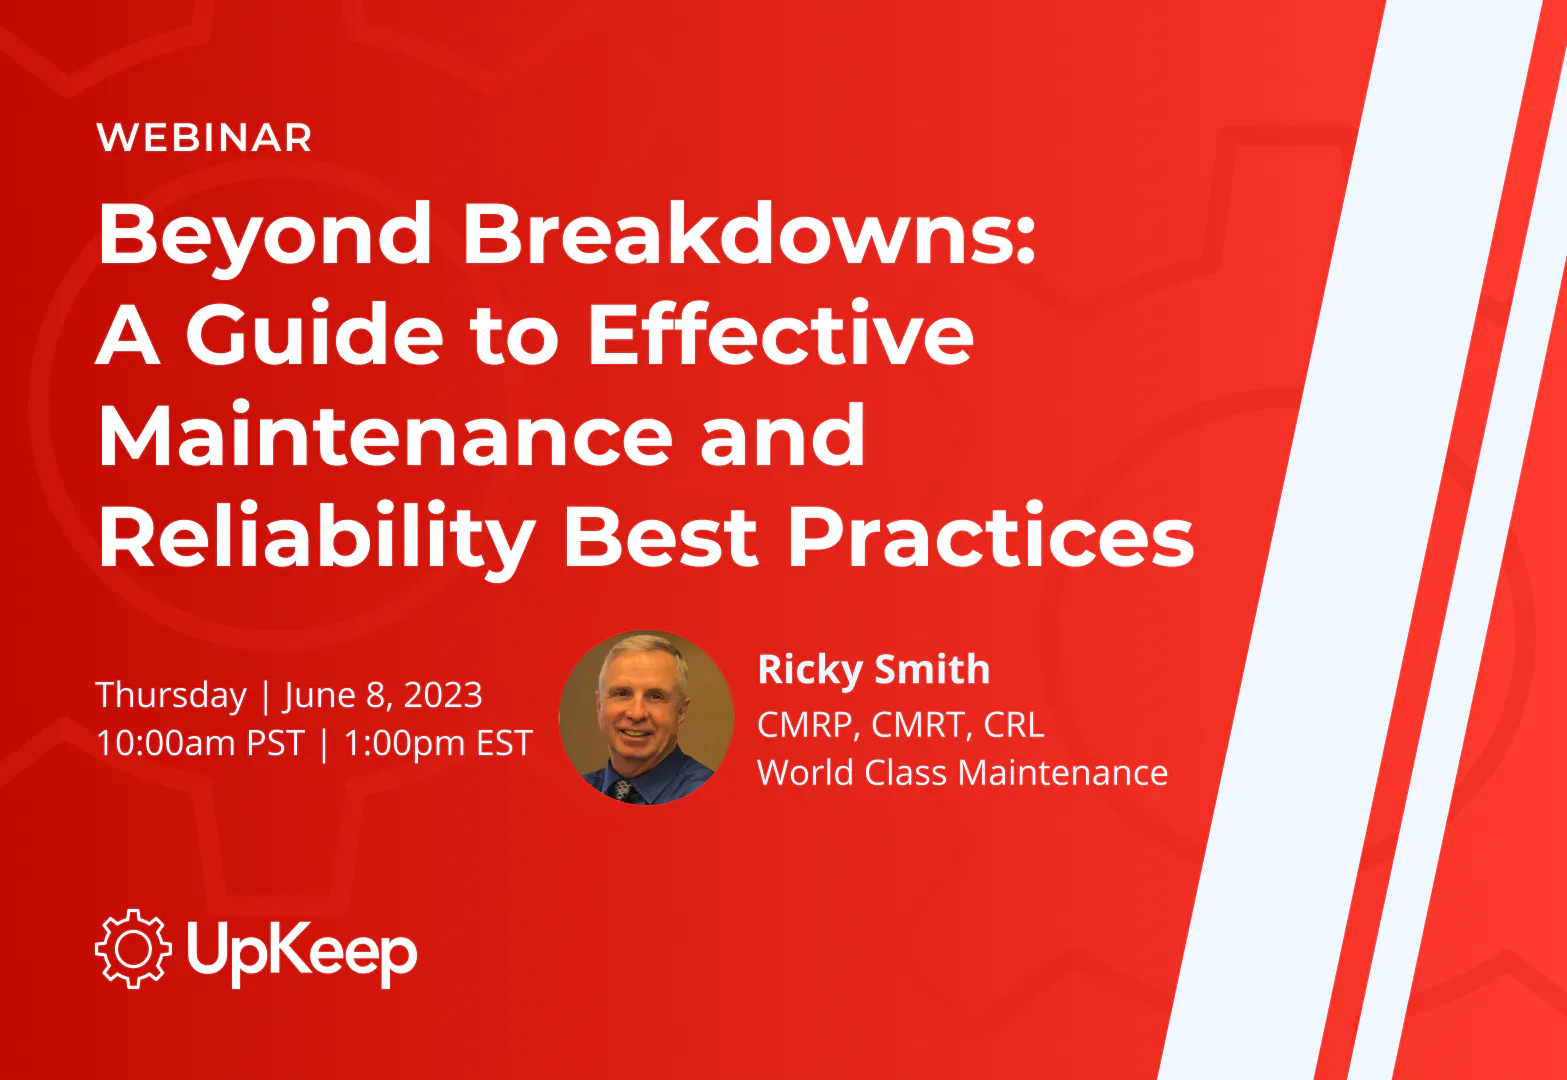 Beyond Breakdowns: A Guide to Effective Maintenance and Reliability Best Practices